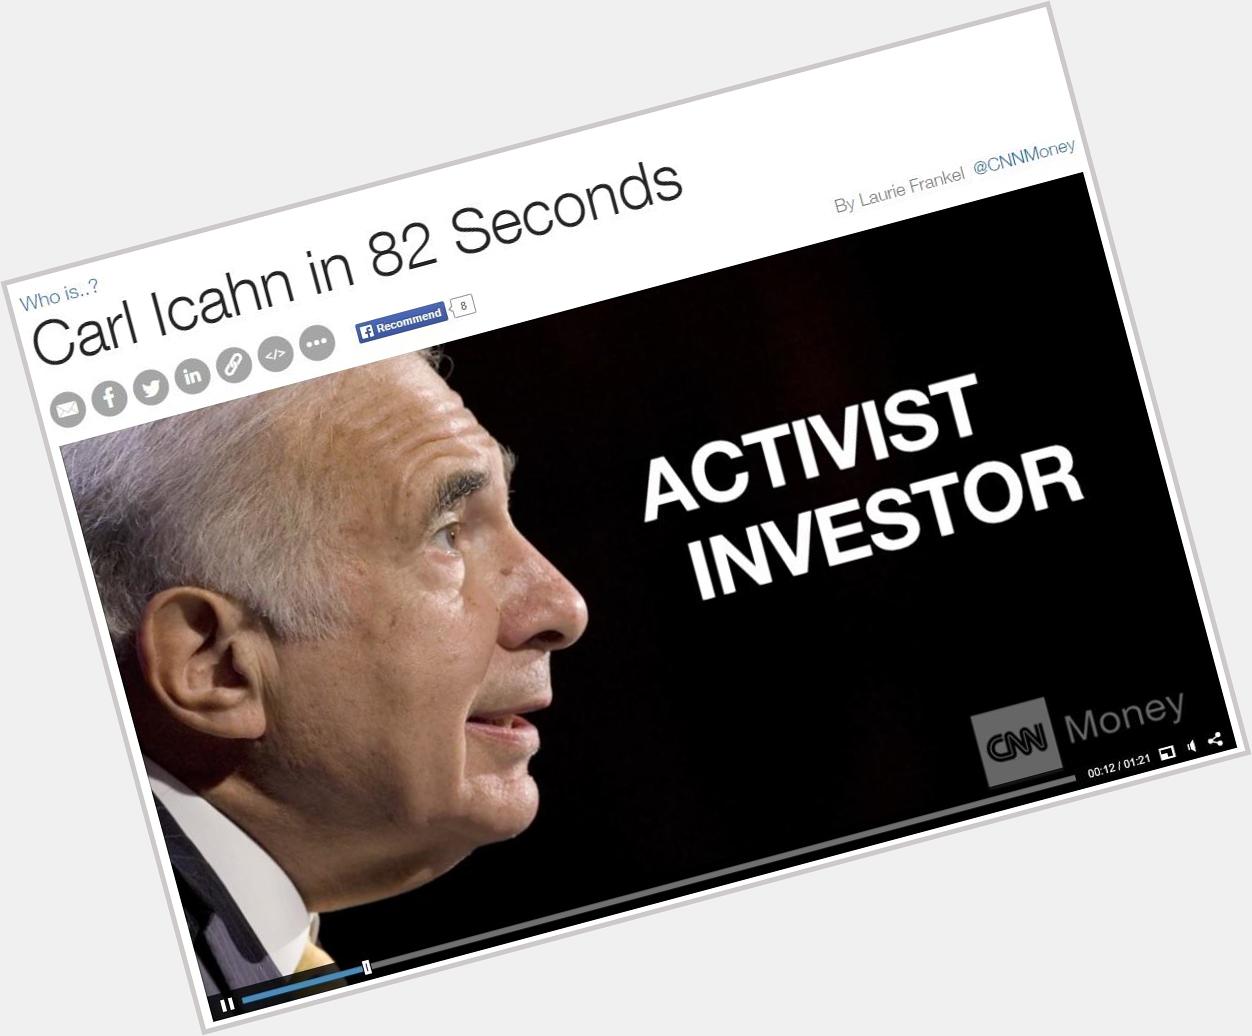 Born today: Happy birthday to Icahn in 82 seconds, by for 